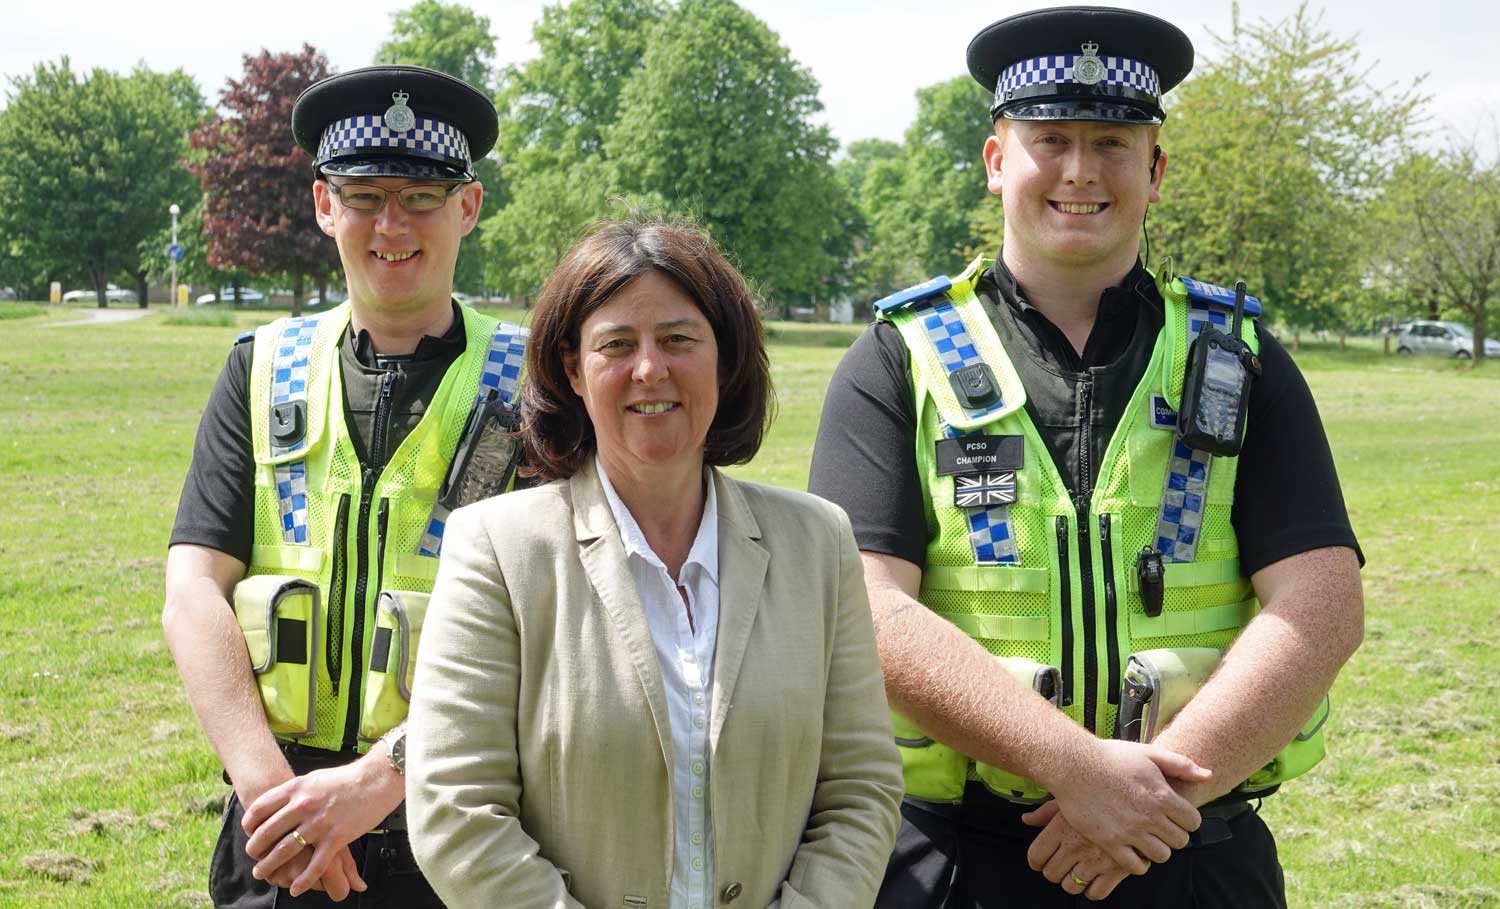 PCSO John Jakes, Julia Mulligan, Police and Crime Commissioner and PCSO Will Champion